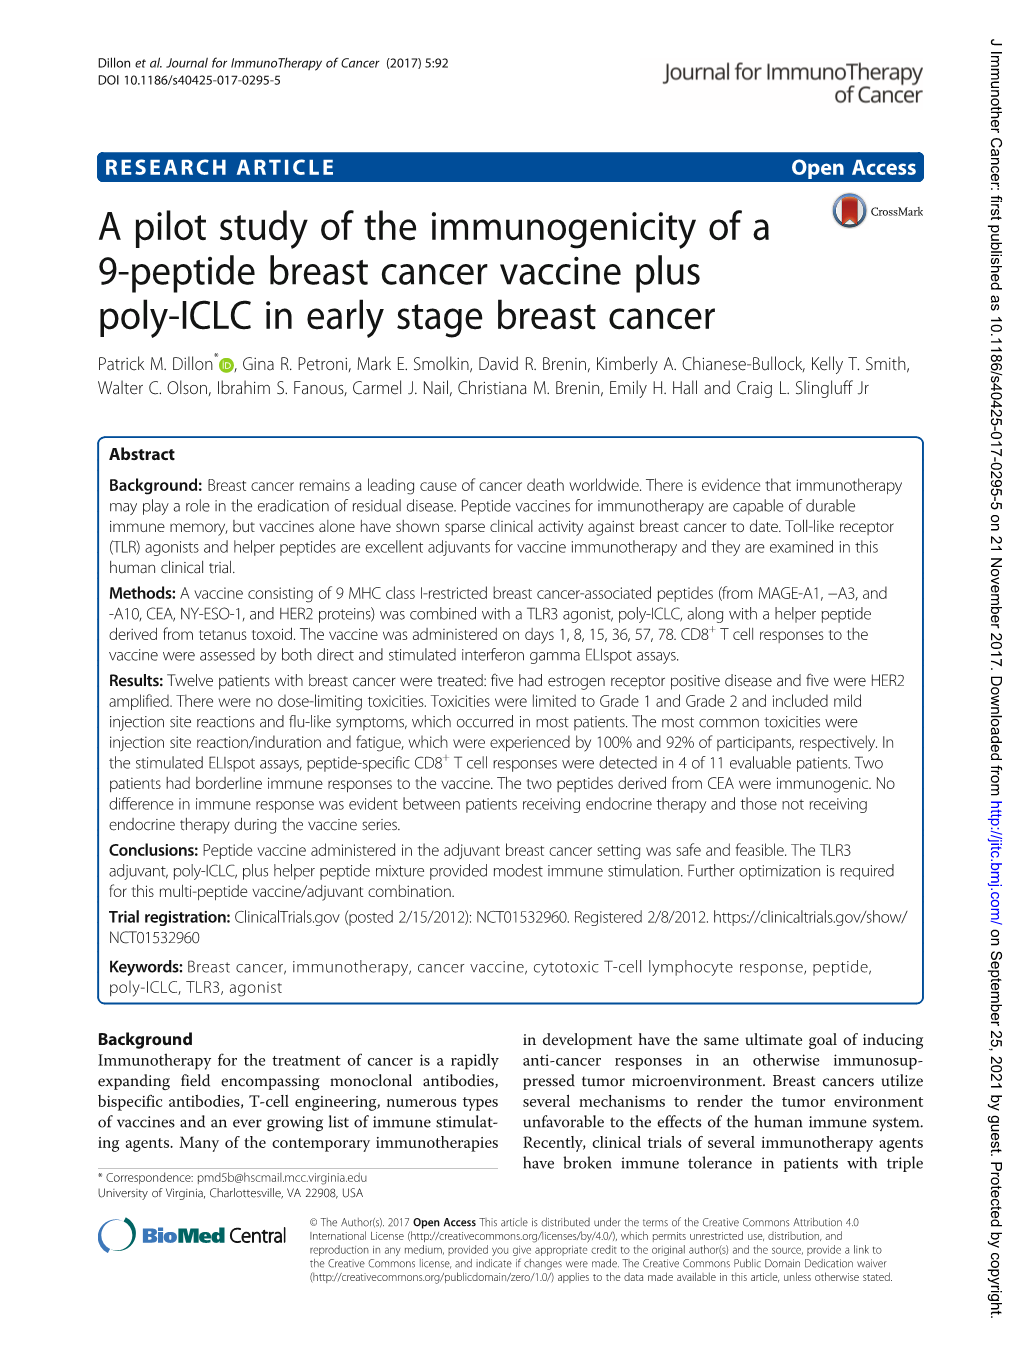 A Pilot Study of the Immunogenicity of a 9-Peptide Breast Cancer Vaccine Plus Poly-ICLC in Early Stage Breast Cancer Patrick M